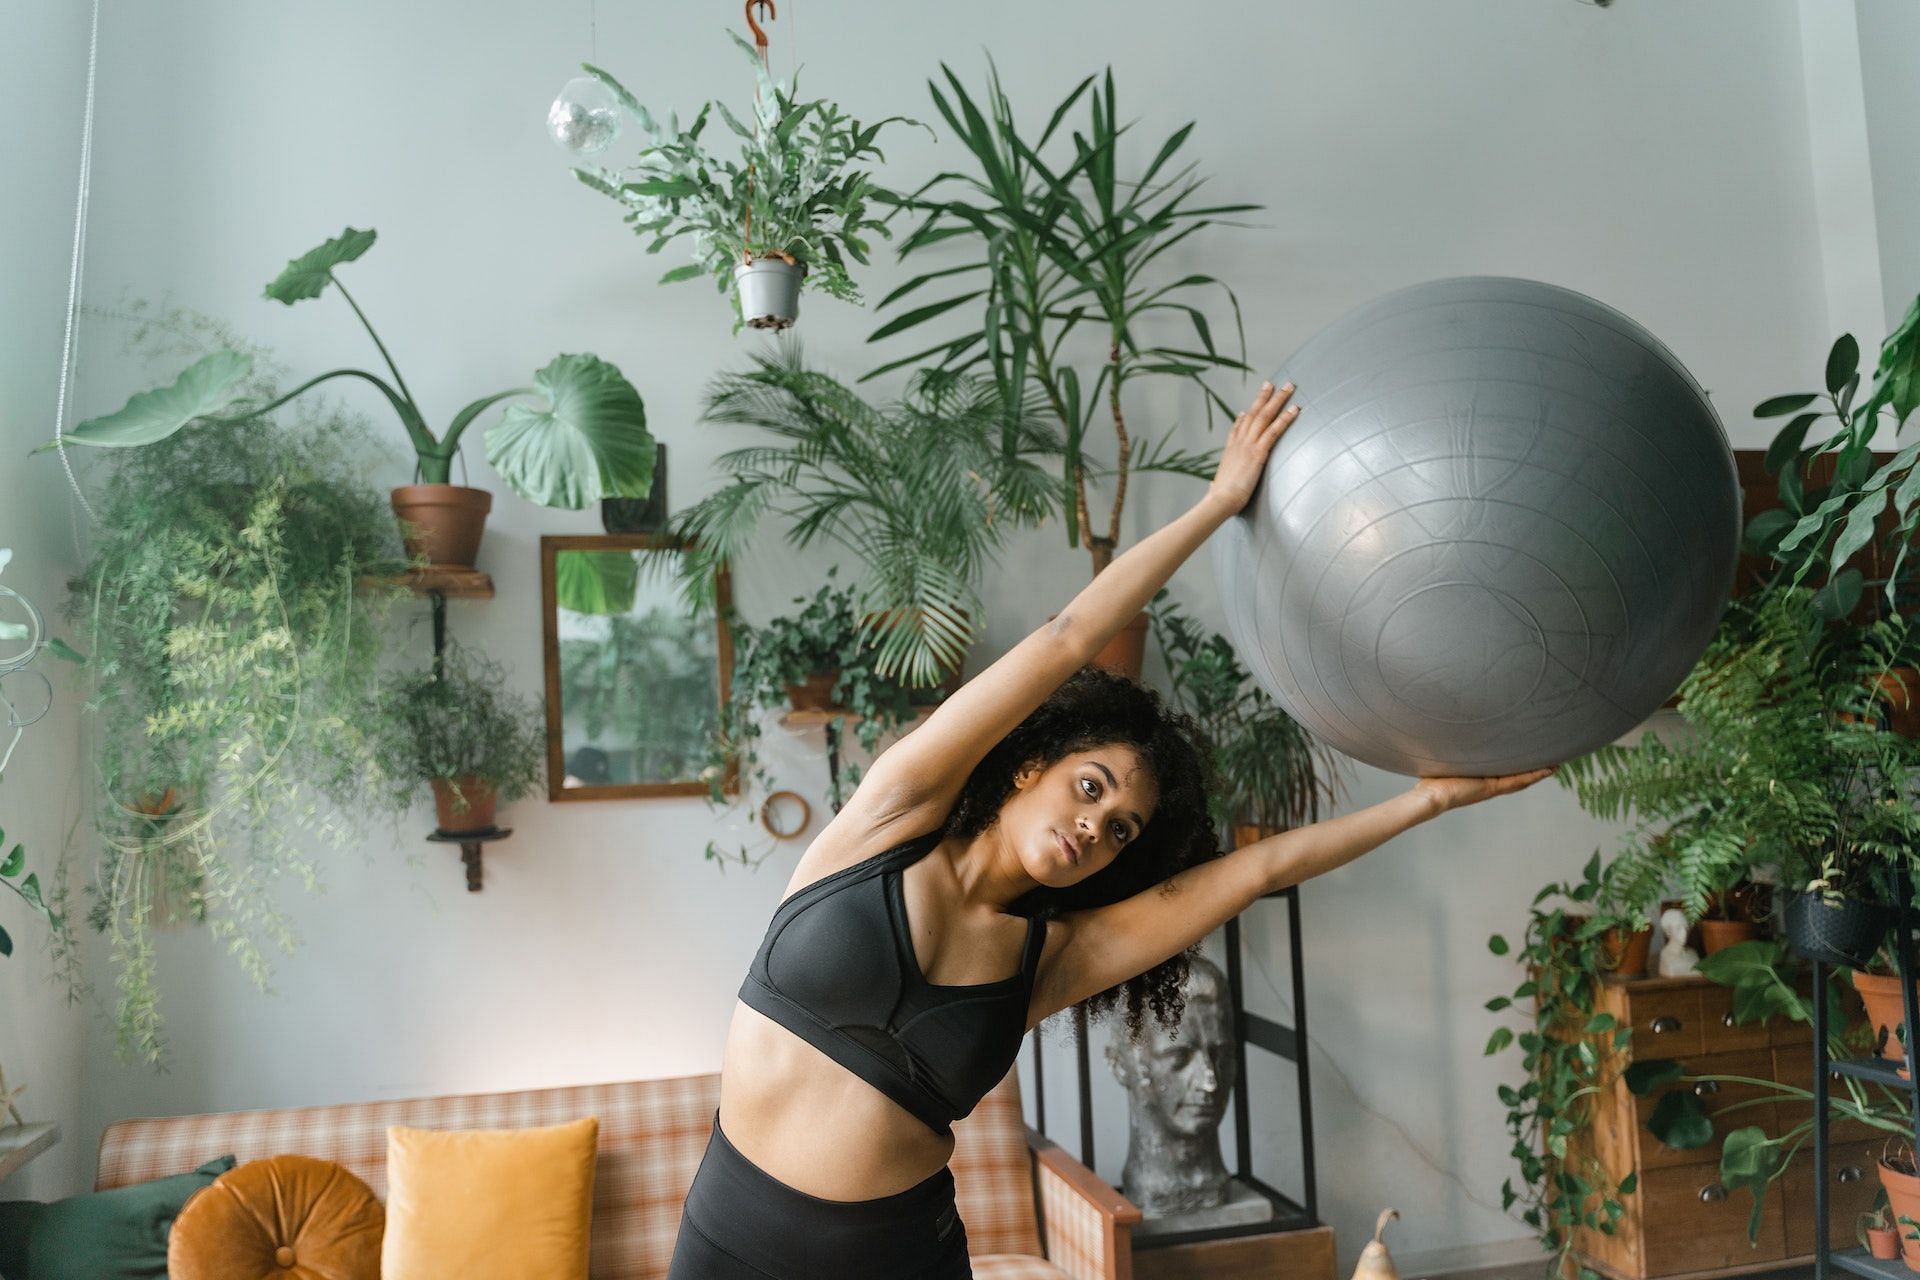 Medicine ball makes a great ab workout tool. (Photo via Pexels/MART PRODUCTION)